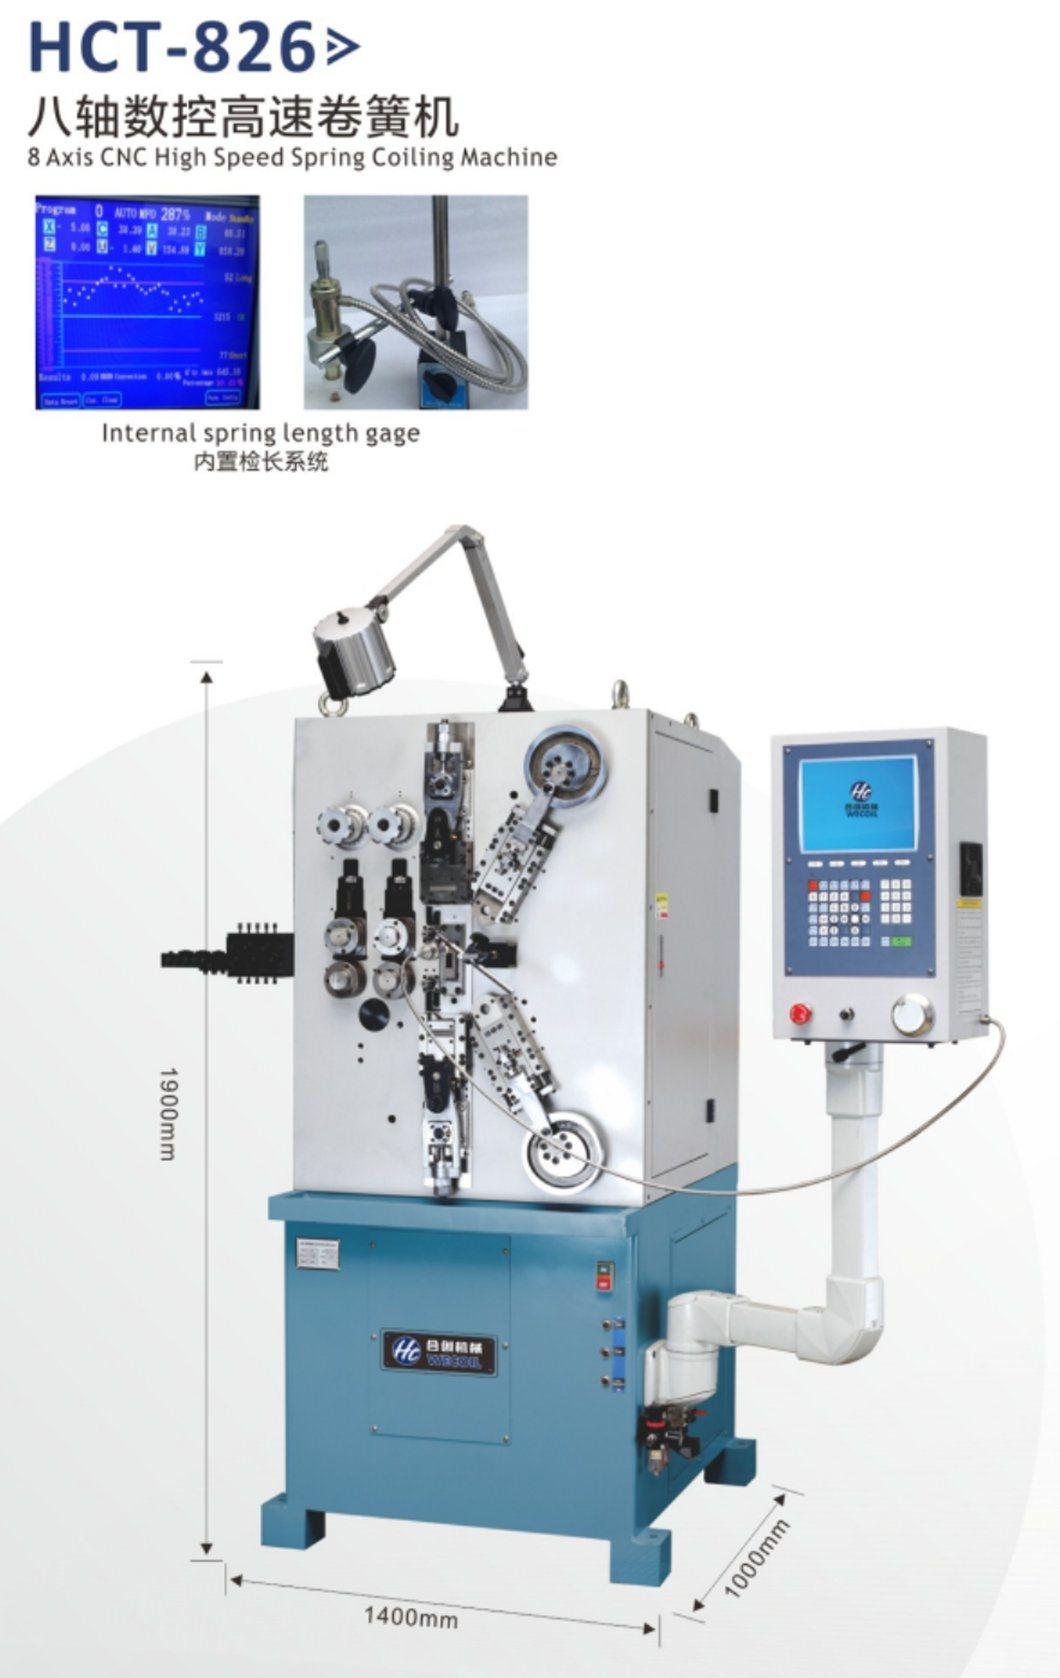 Wecoil-Hct-816 8 Axis CNC Spring Coiling Machine